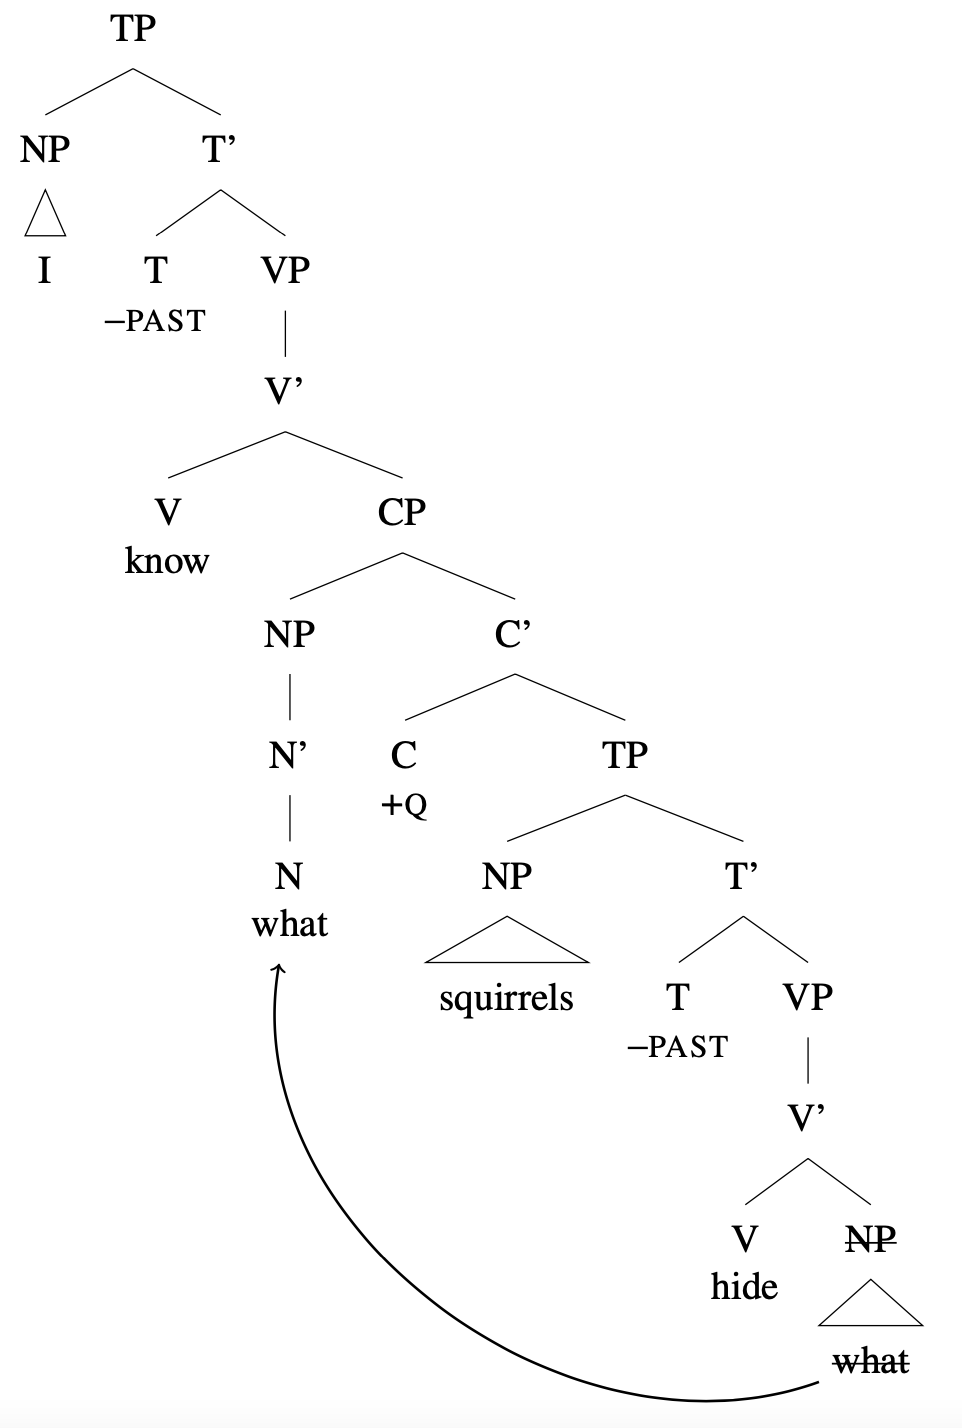 Tree diagram: [TP [NP I ] [T' [T -PAST] [VP [V' [V know] [CP [NP [N' [N what] ] ] [C' [C +Q] [TP [NP squirrels] [T' [T -PAST] [VP [V' [V hide] [crossed out NP nuts] ] ] ] ] ] ] ] ] ] ] arrow from lower "what" to "what" in embedded Spec,CP